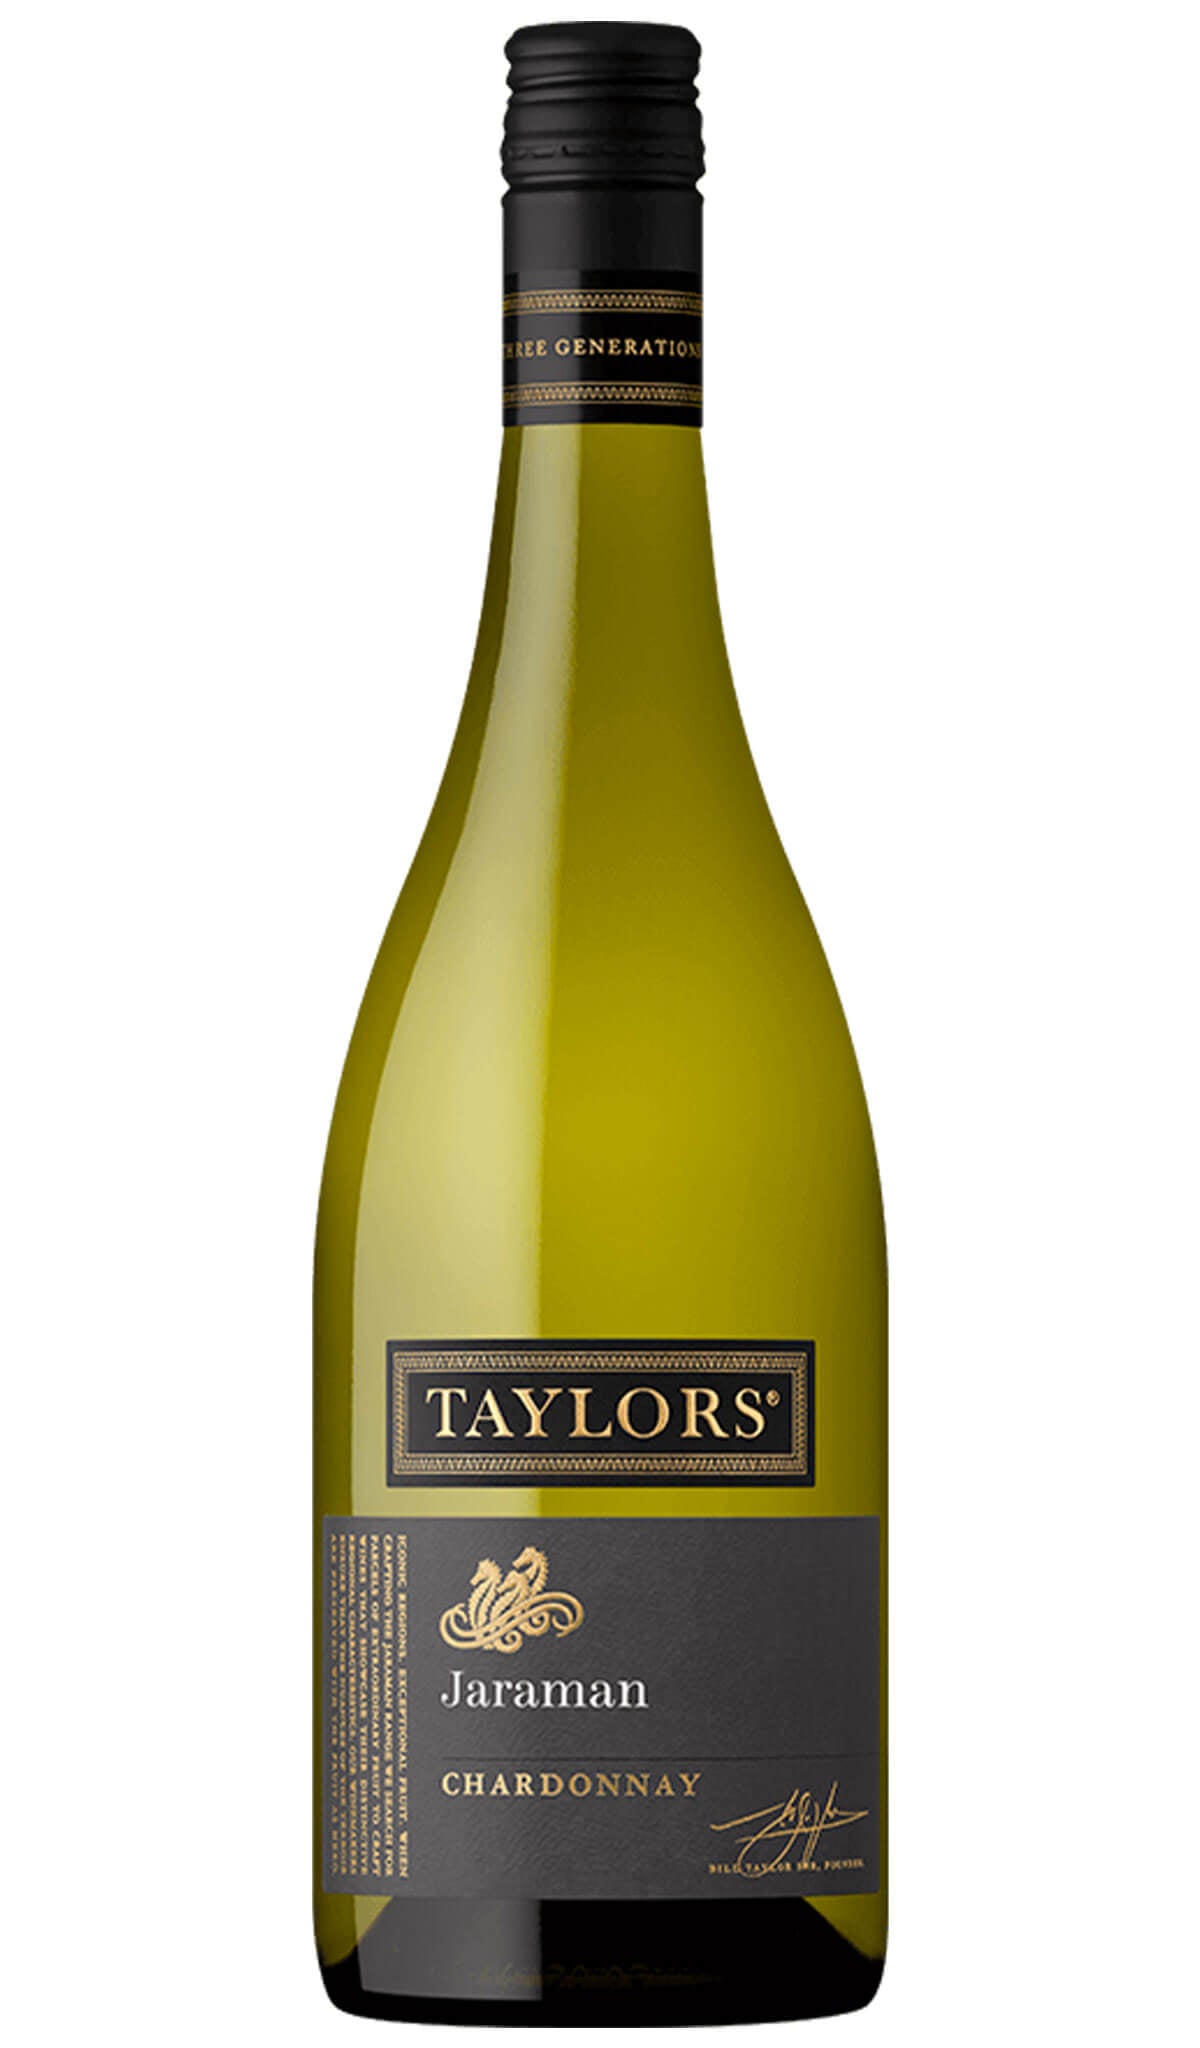 Find out more or purchase Taylors Jaraman Chardonnay 2023 (Adelaide Hills & Clare Valley) available online at Wine Sellers Direct - Australia's independent liquor specialists.